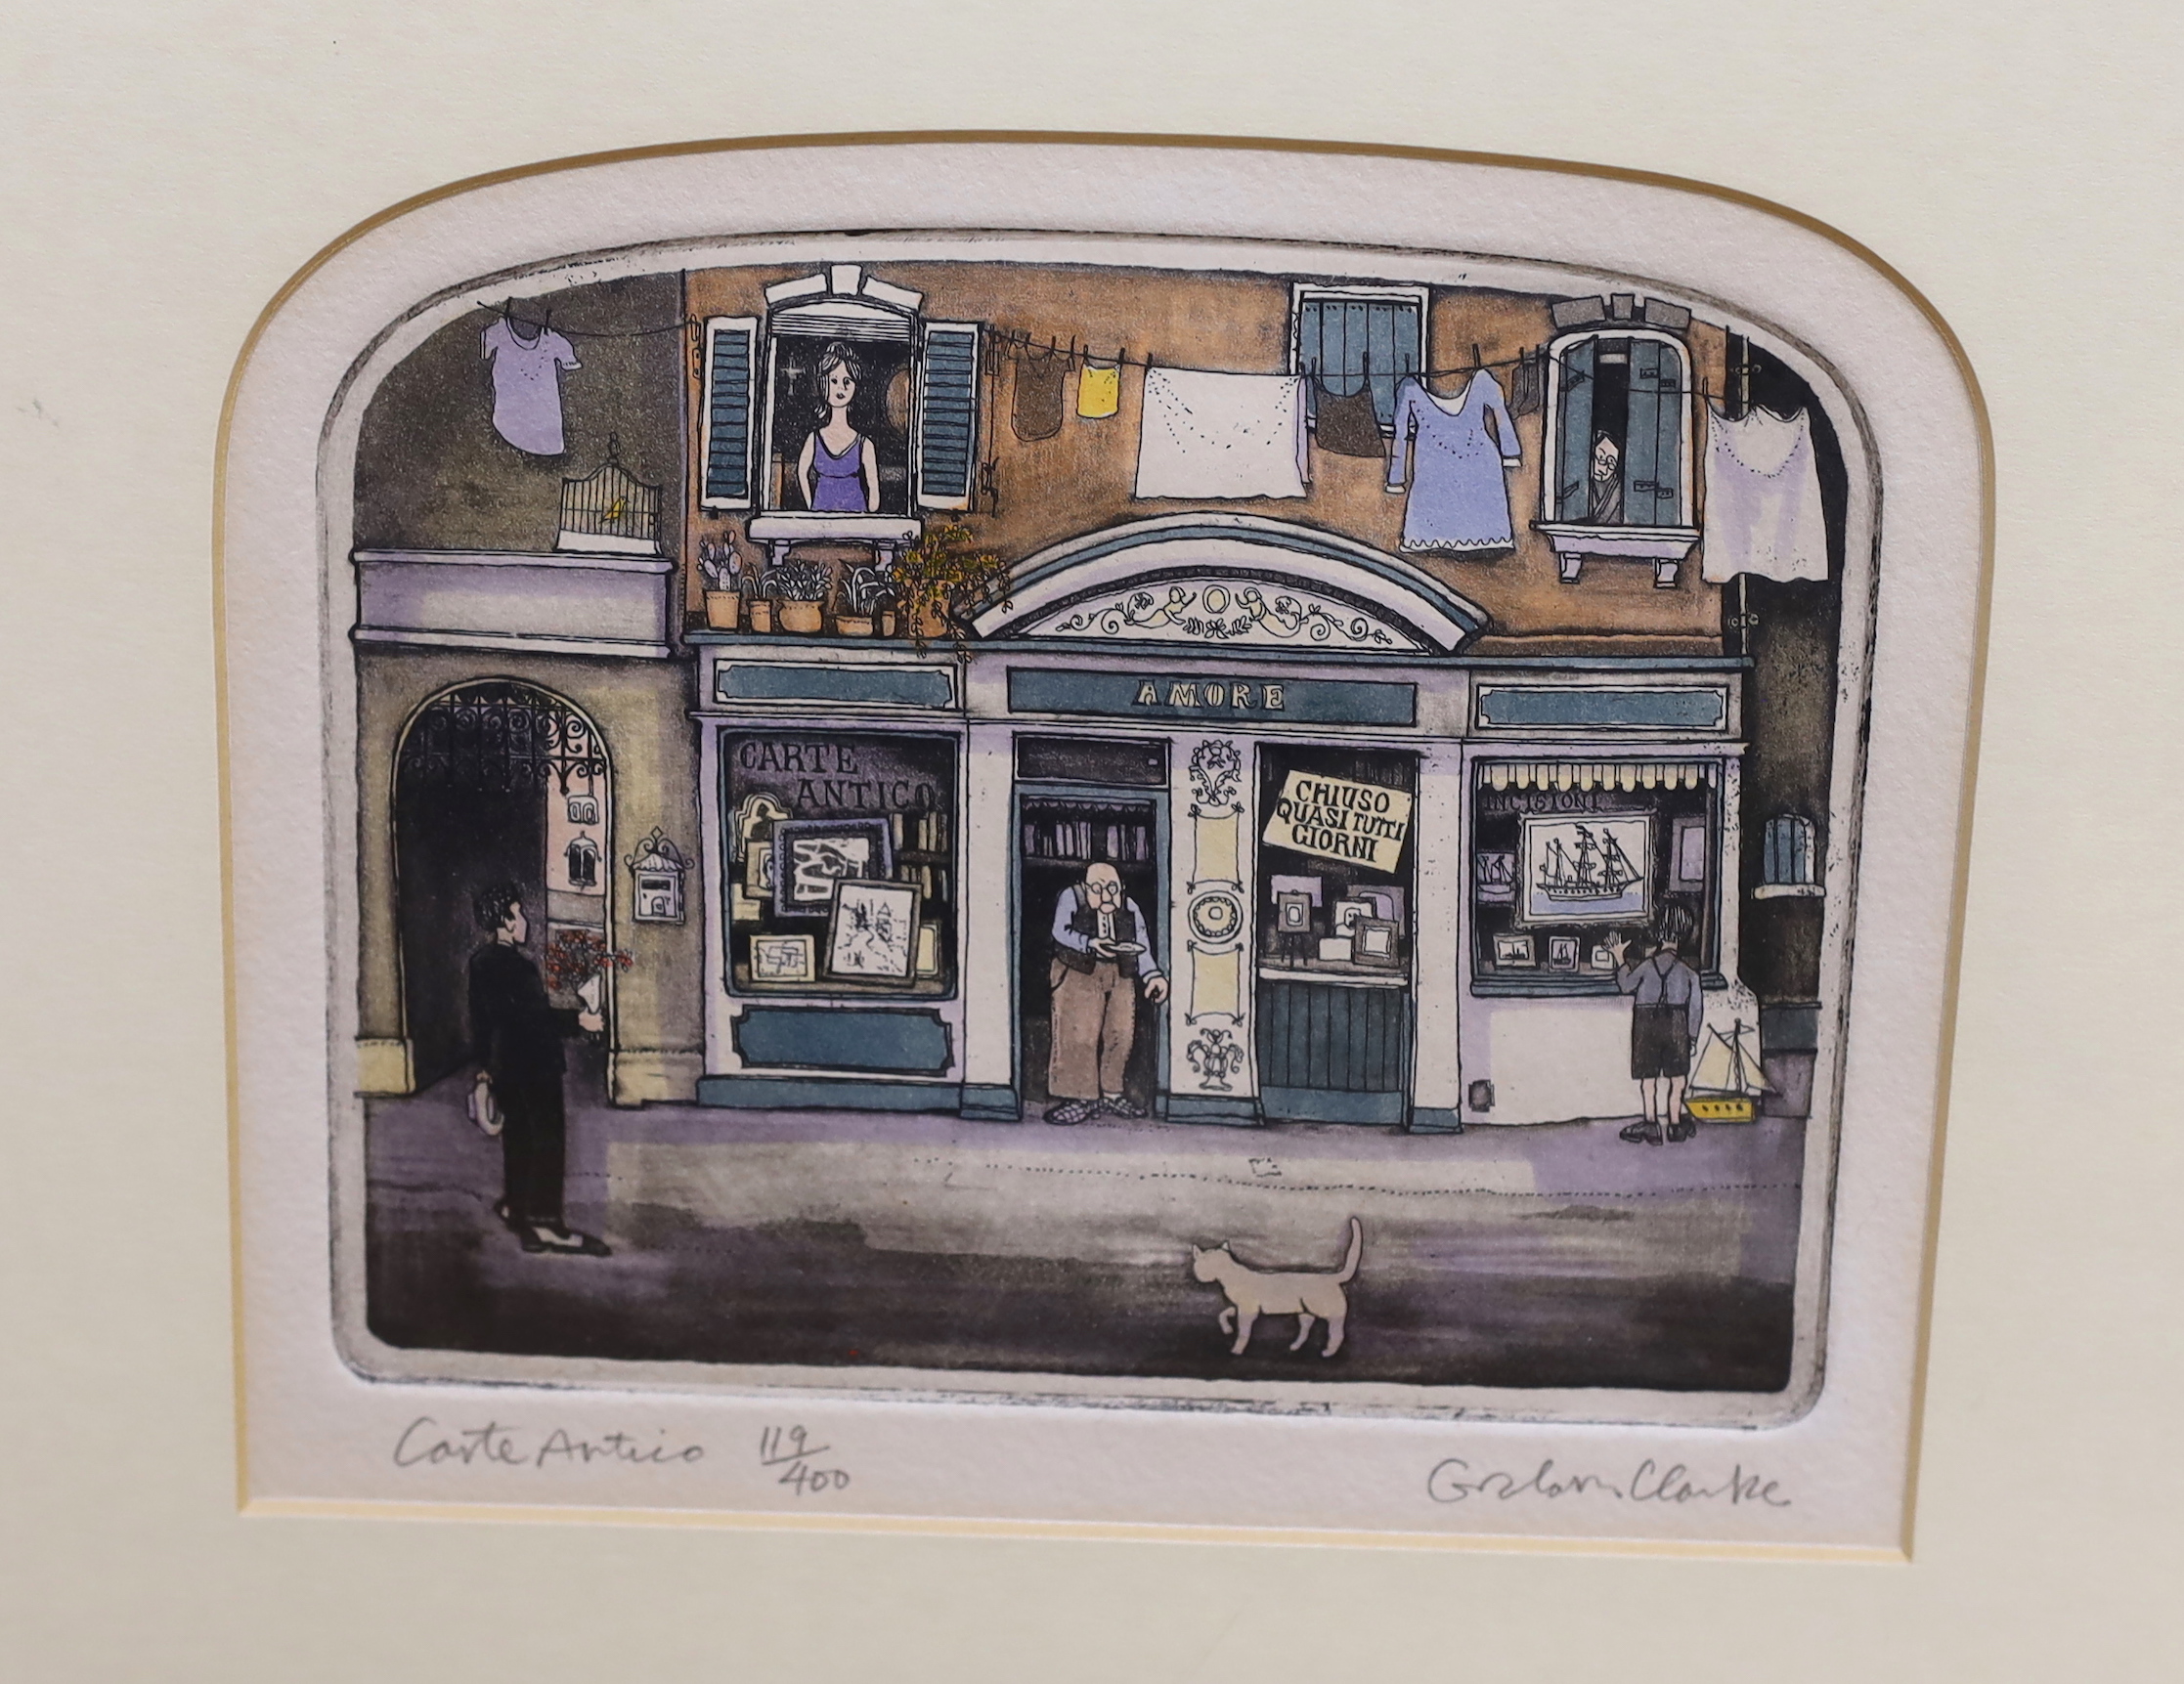 Graham Clarke (b.1941) set of four colour etchings, including 'Trattoria Romantica' and 'Carte Antico' signed in pencil, each limited edition of 400, CCA Gallery, New York labels verso, 19 x 16cm